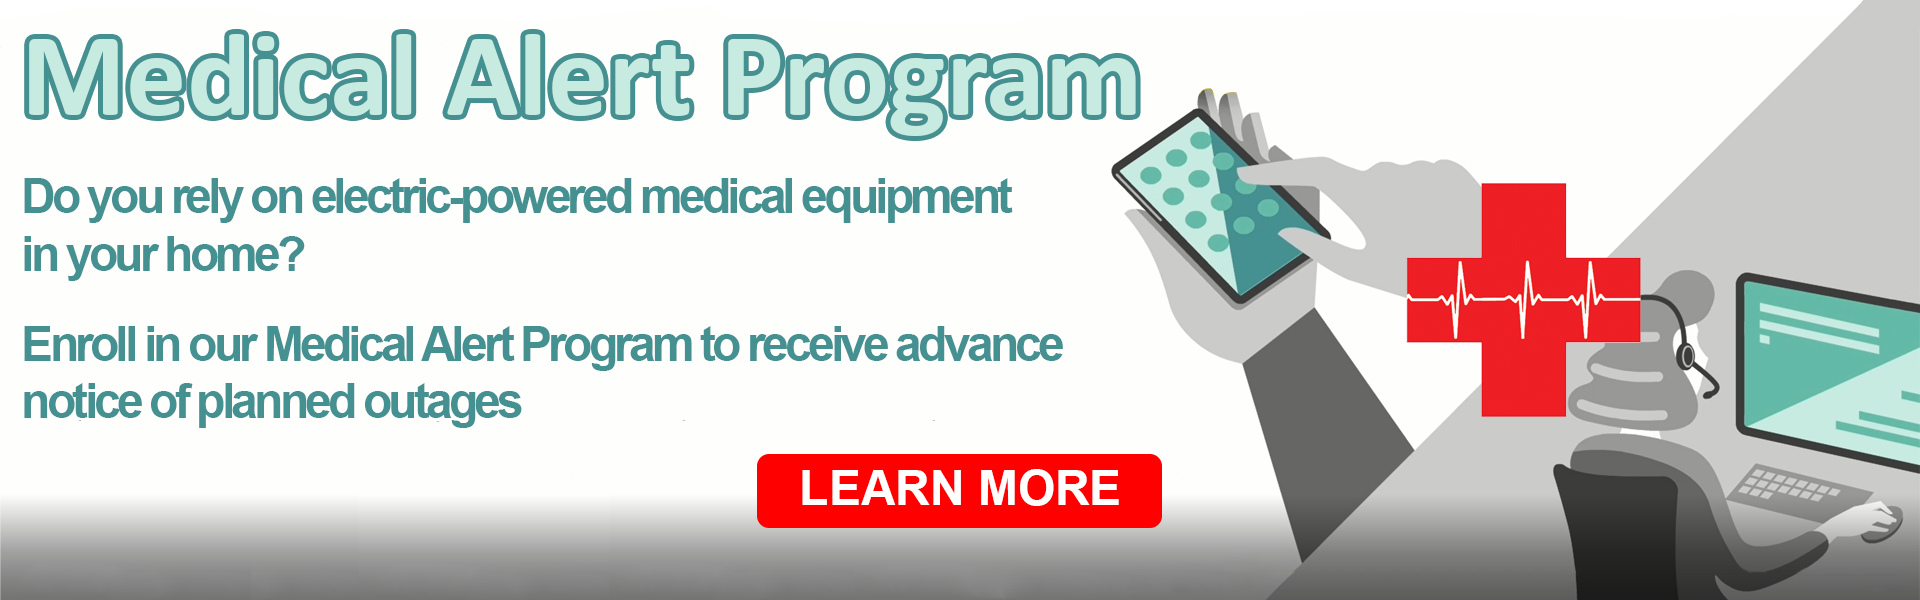 Medical Alert Program - Do you rely on electric-powered medical equipment in your home? Enroll in our Medical Alert Program to receive advance notice of planned outages. LEARN MORE